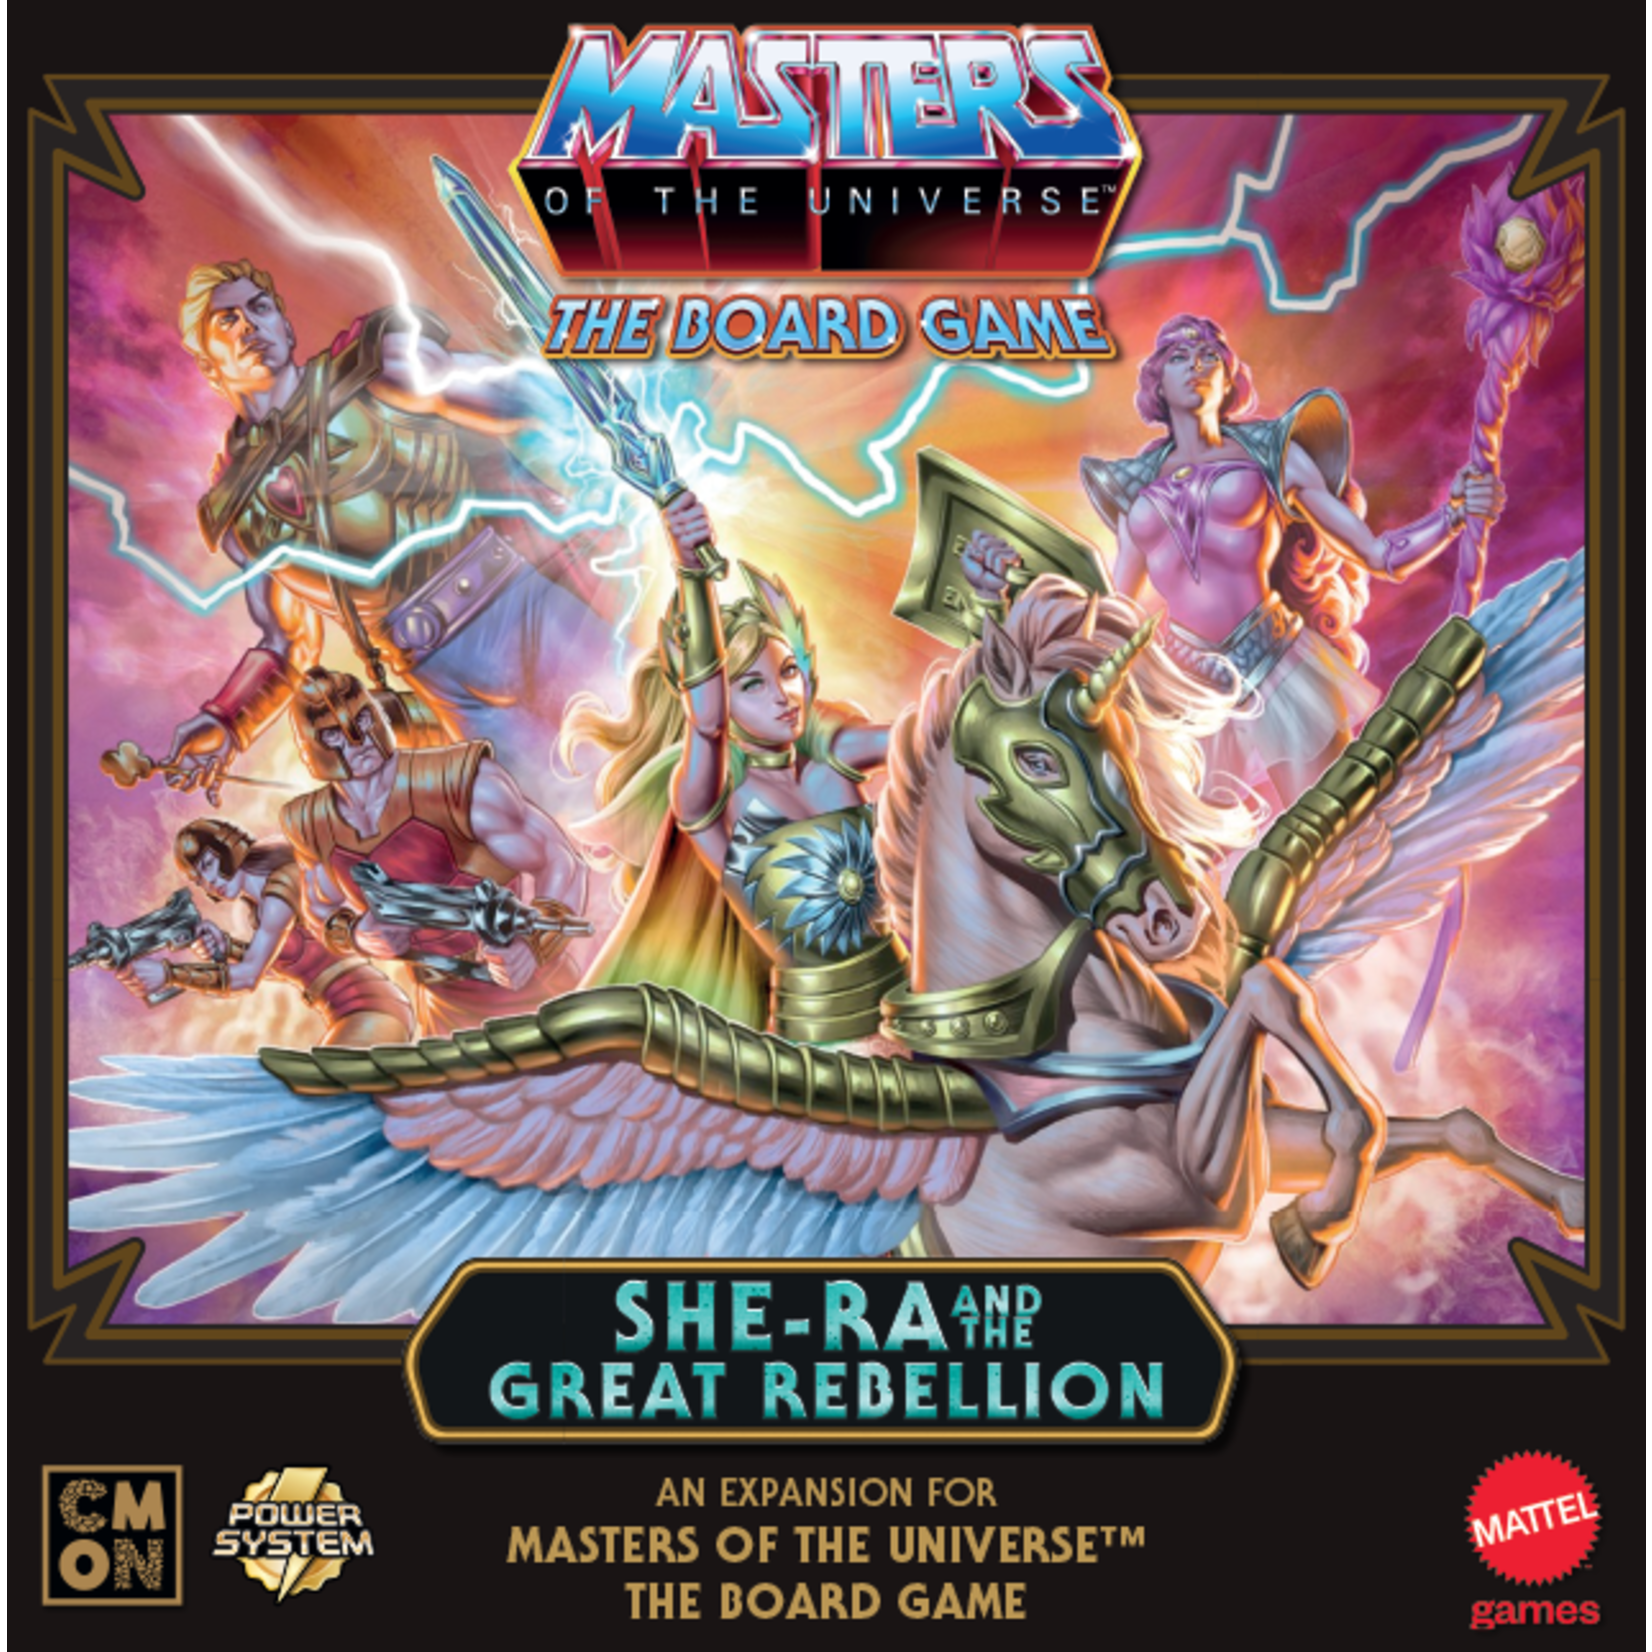 Cool Mini or Not Masters of the Universe: She-ra and the Great Rebellion